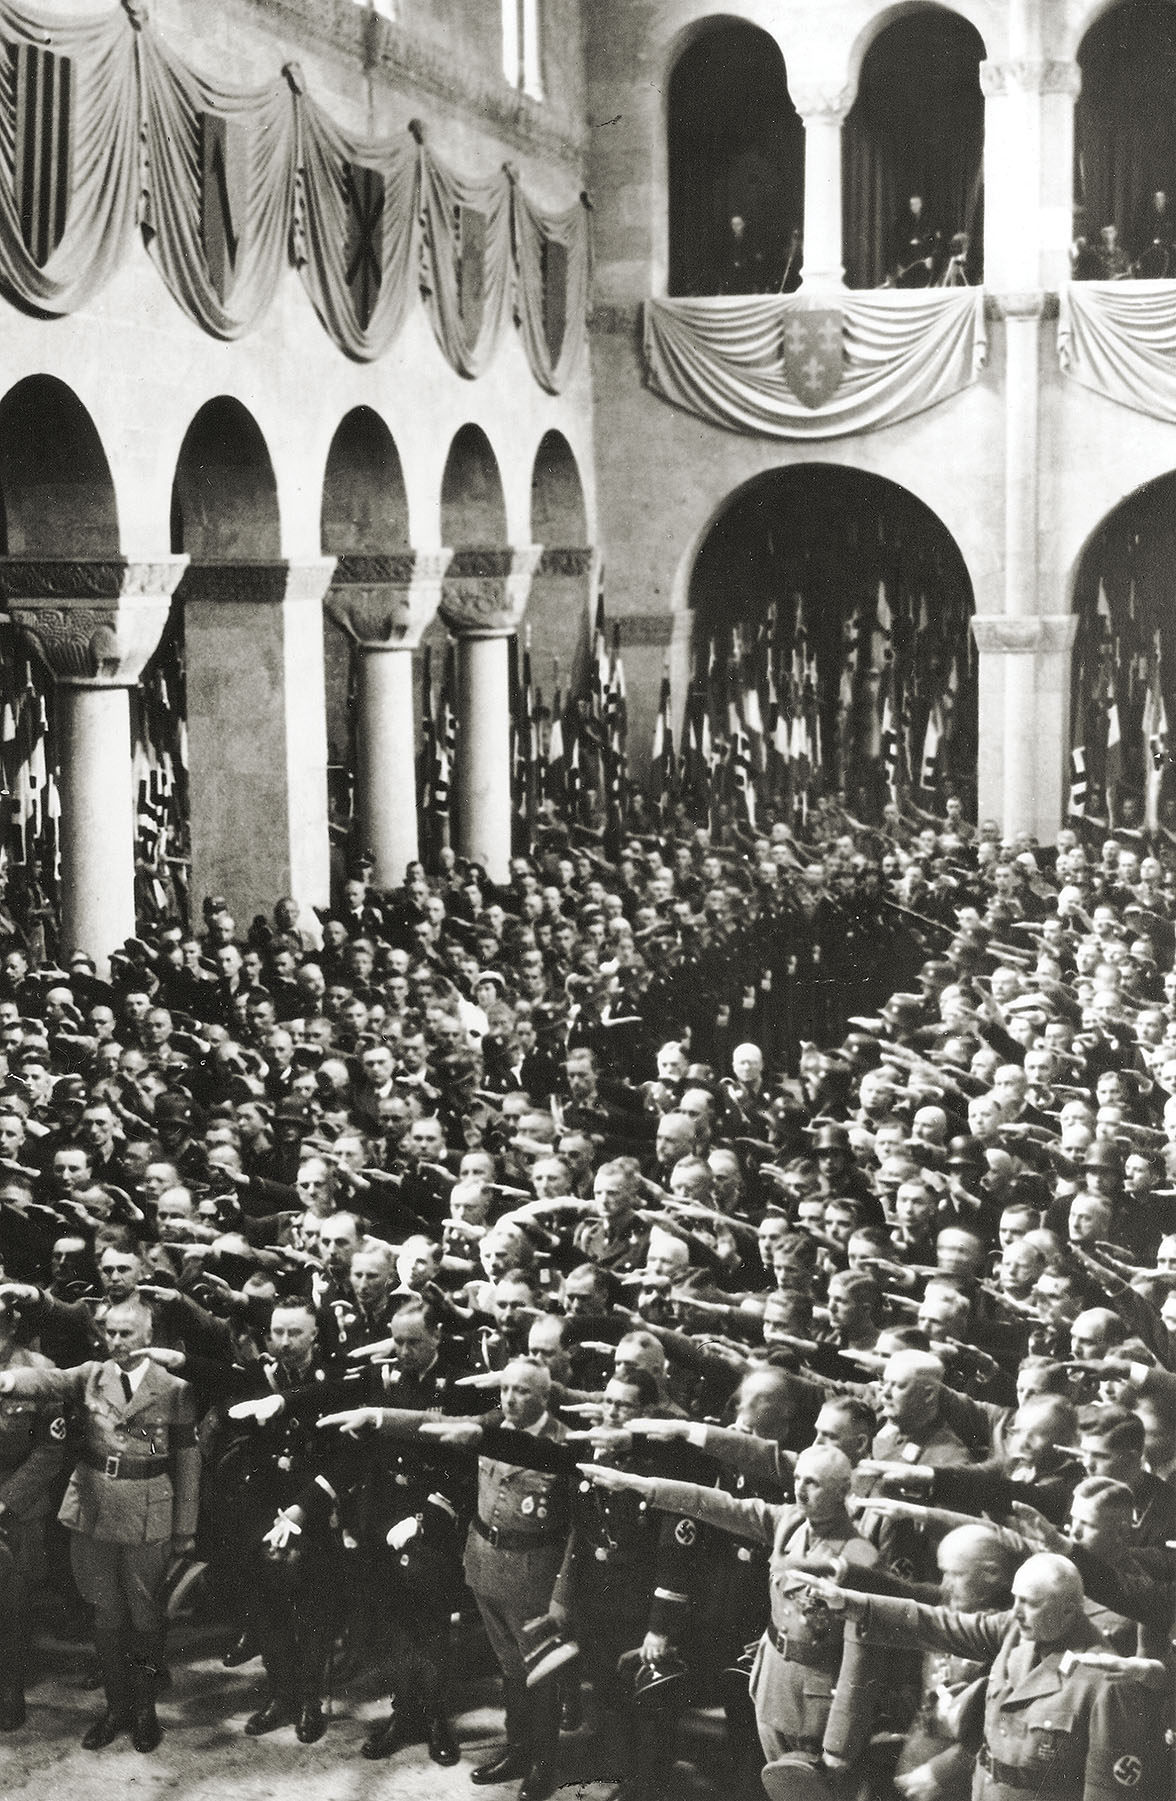 Himmler (front row, second from left) and Nazi guests perform a Hitler salute during a "worship" ceremony at the cathedral in 1936. Many Nazi officials who became infamous for crimes against humanity attended, including Holocaust architect Reinhard Heydrich, visible standing right behind Himmler.